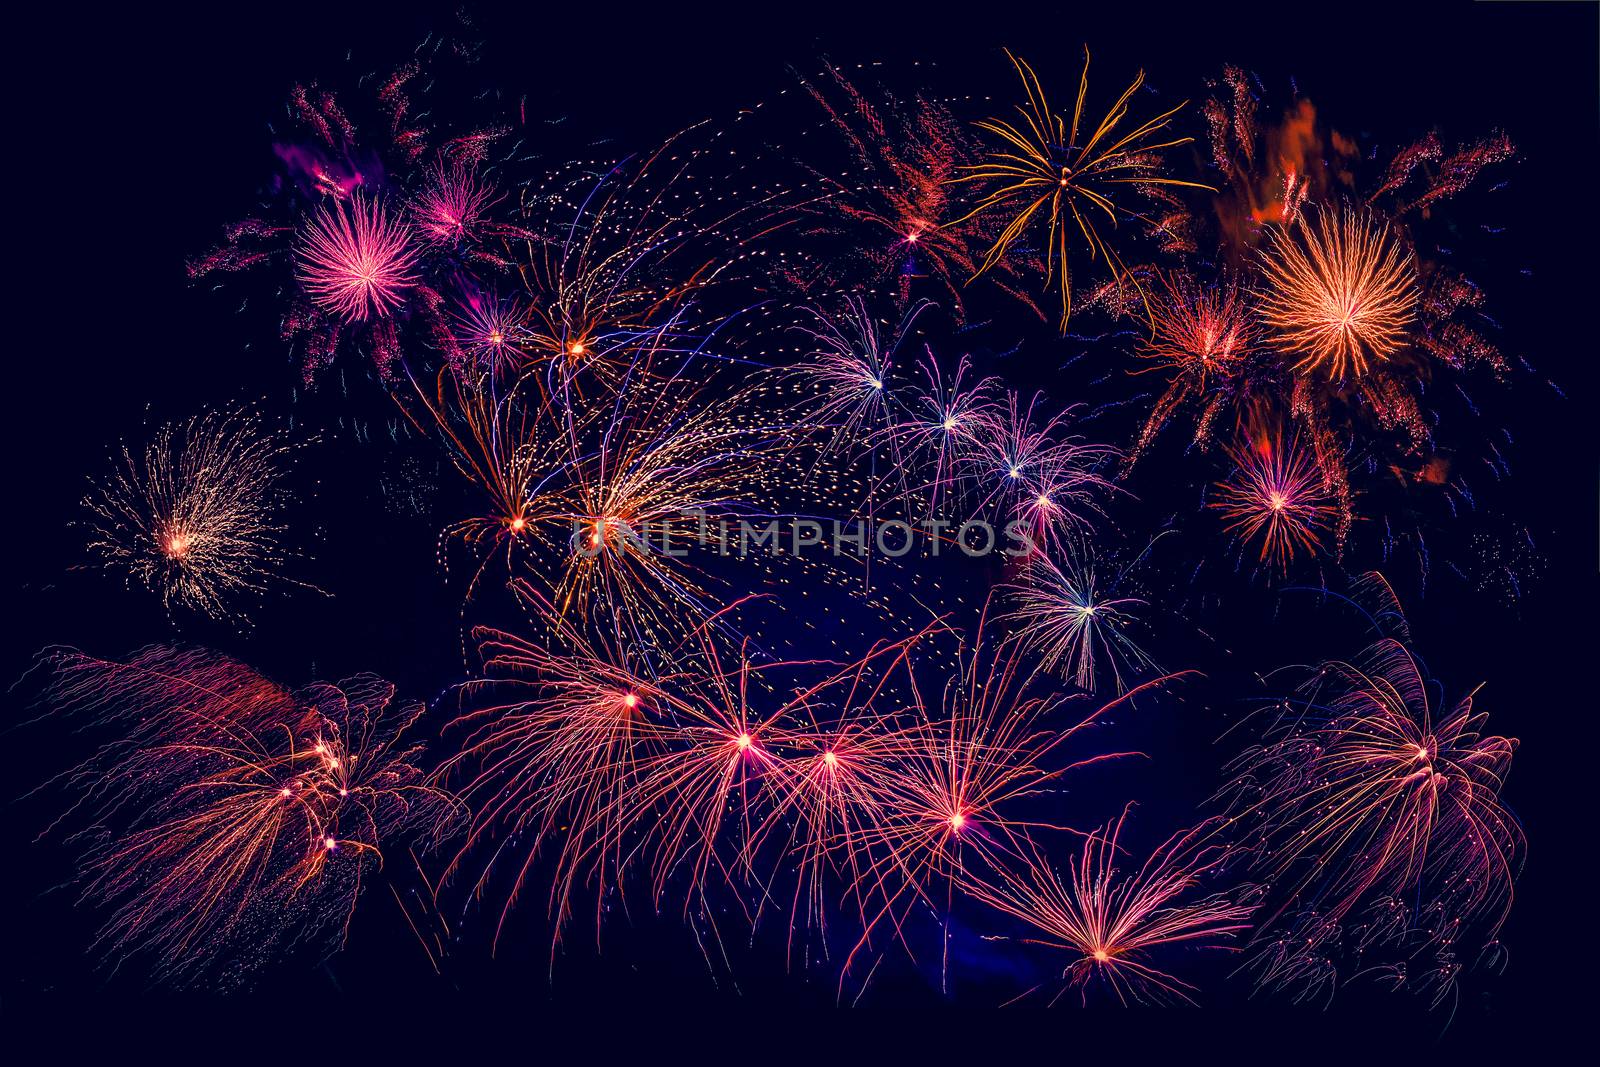 Fireworks in beautiful colors at new years eve